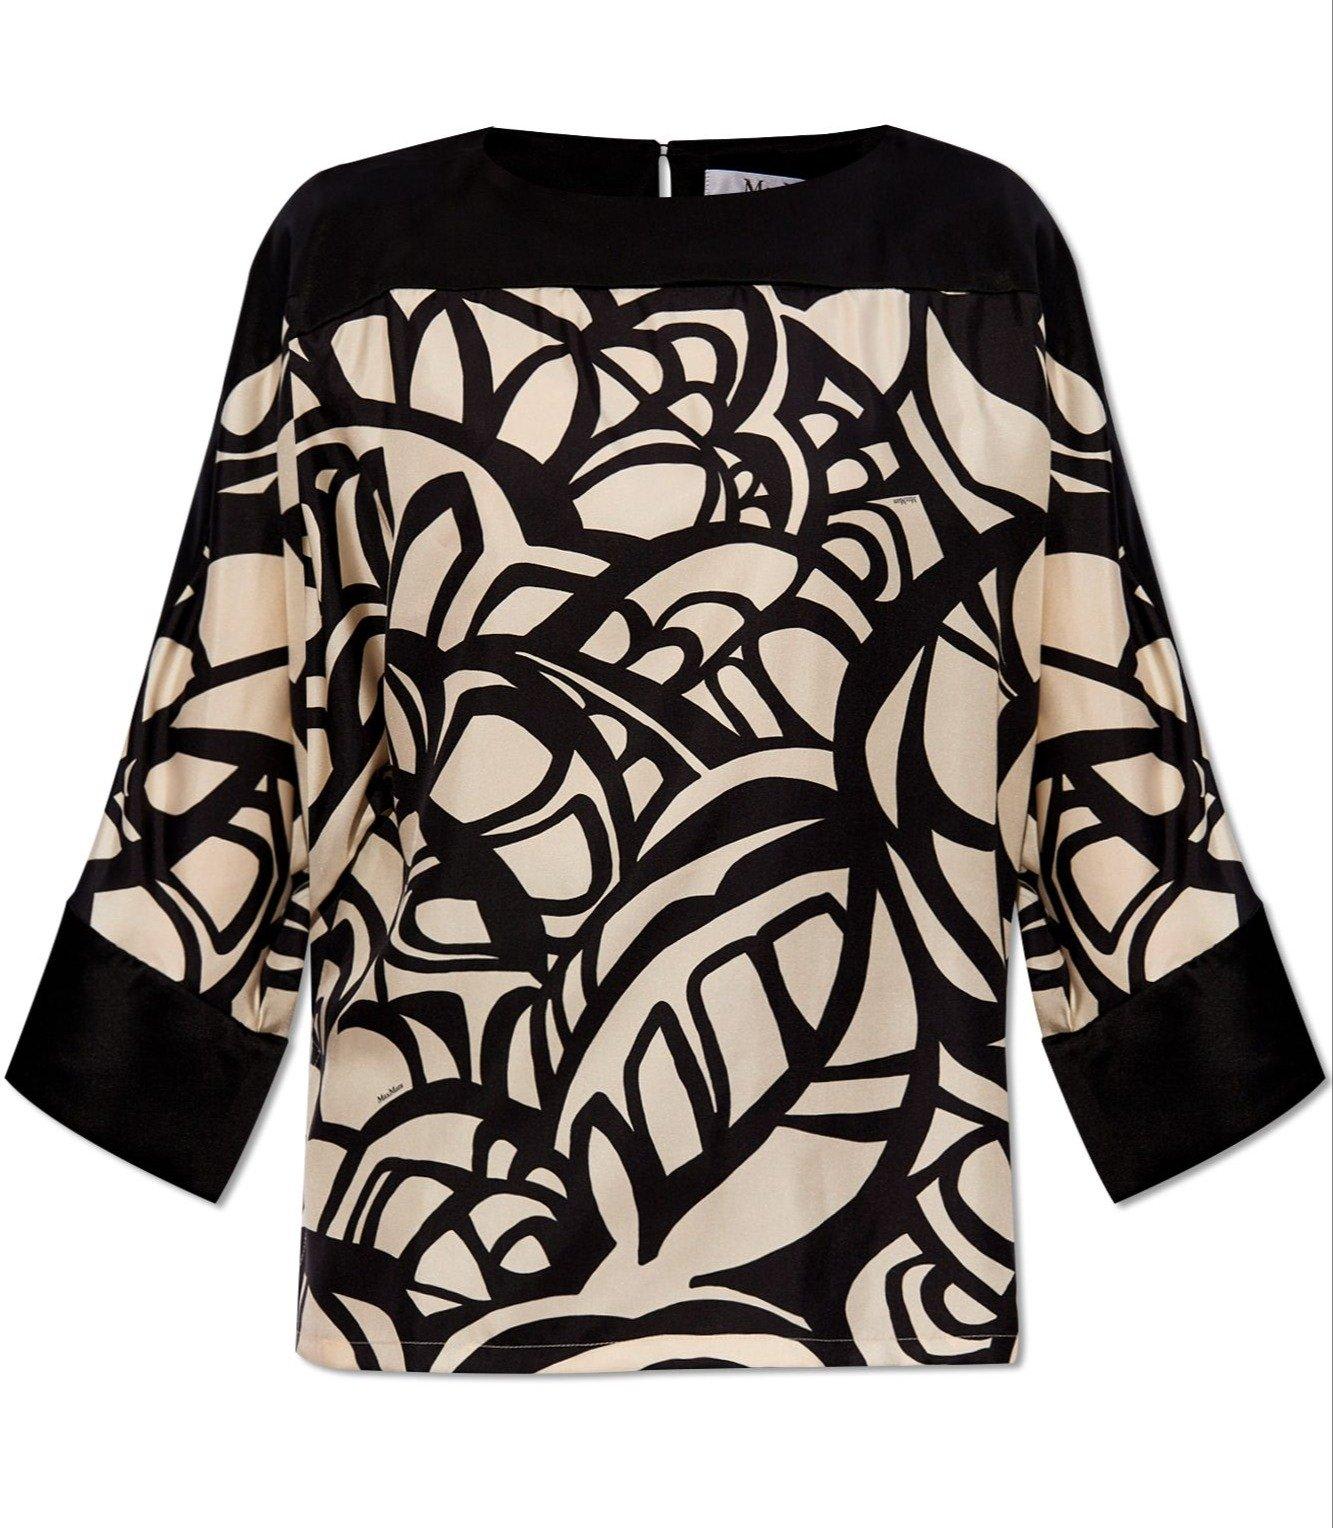 All-over Printed Long-sleeved Top